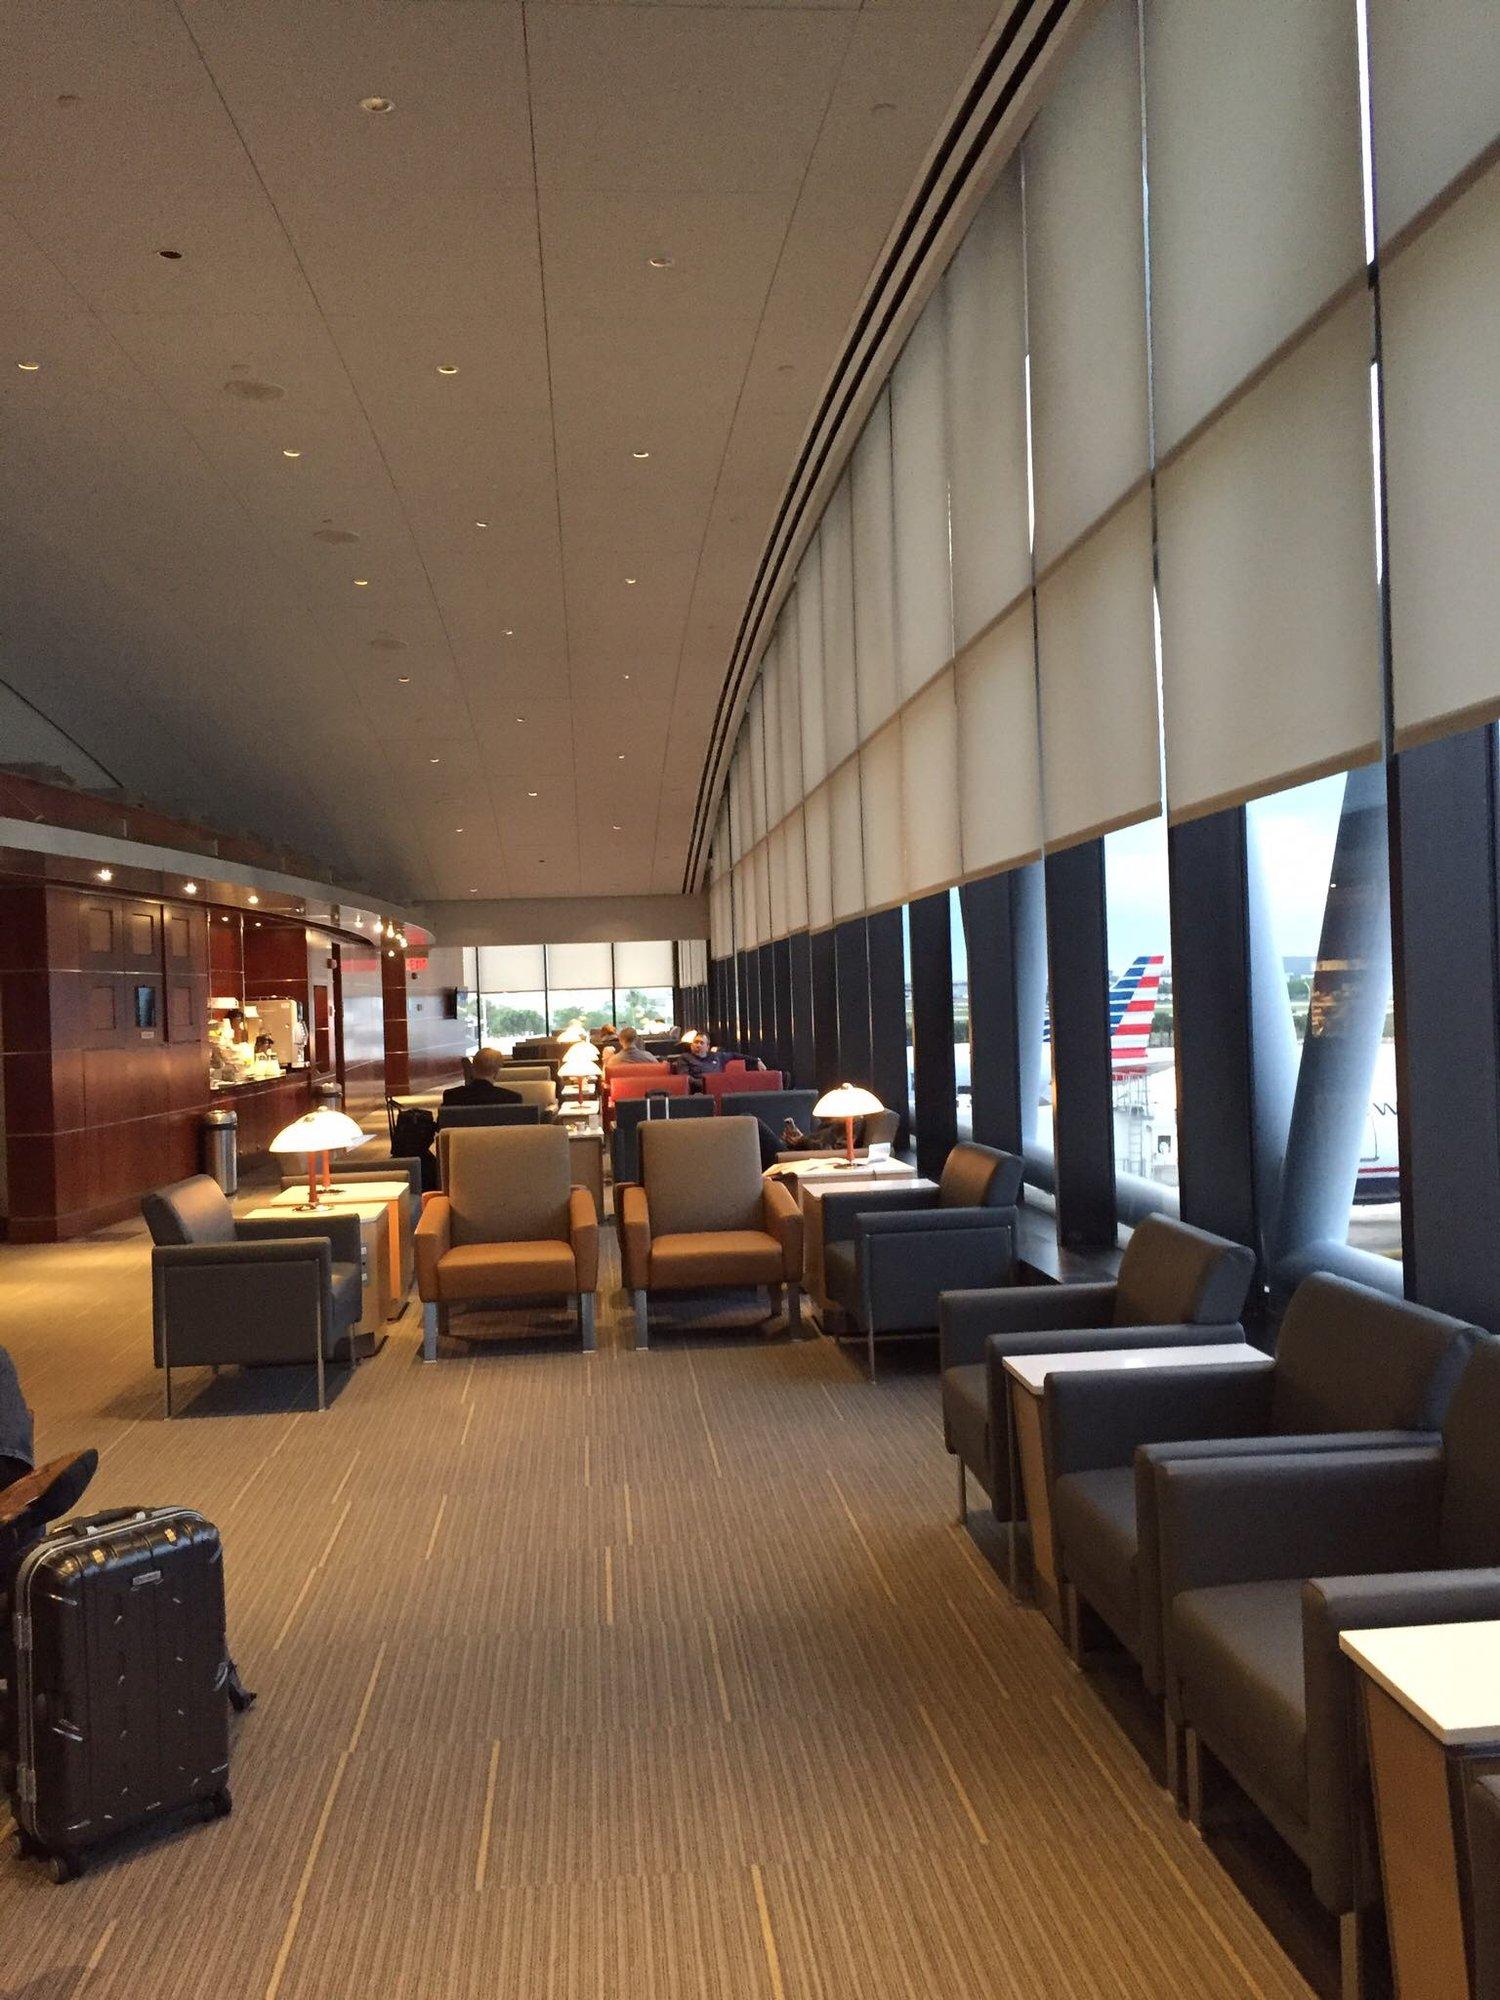 American Airlines Admirals Club image 14 of 20